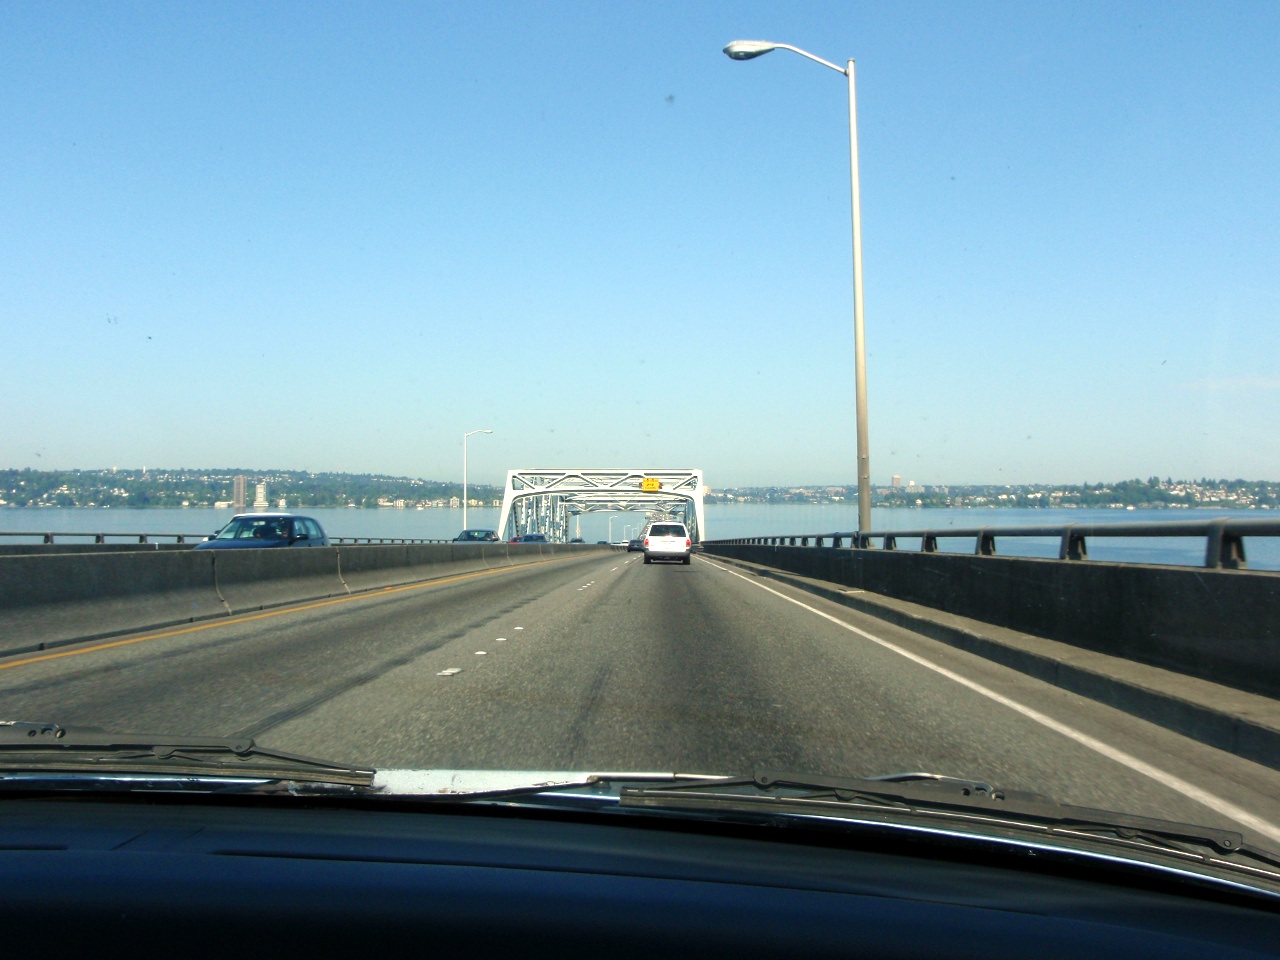 Wednesday: we try to beat the heat by returning via the coast. Evergreen floating bridge